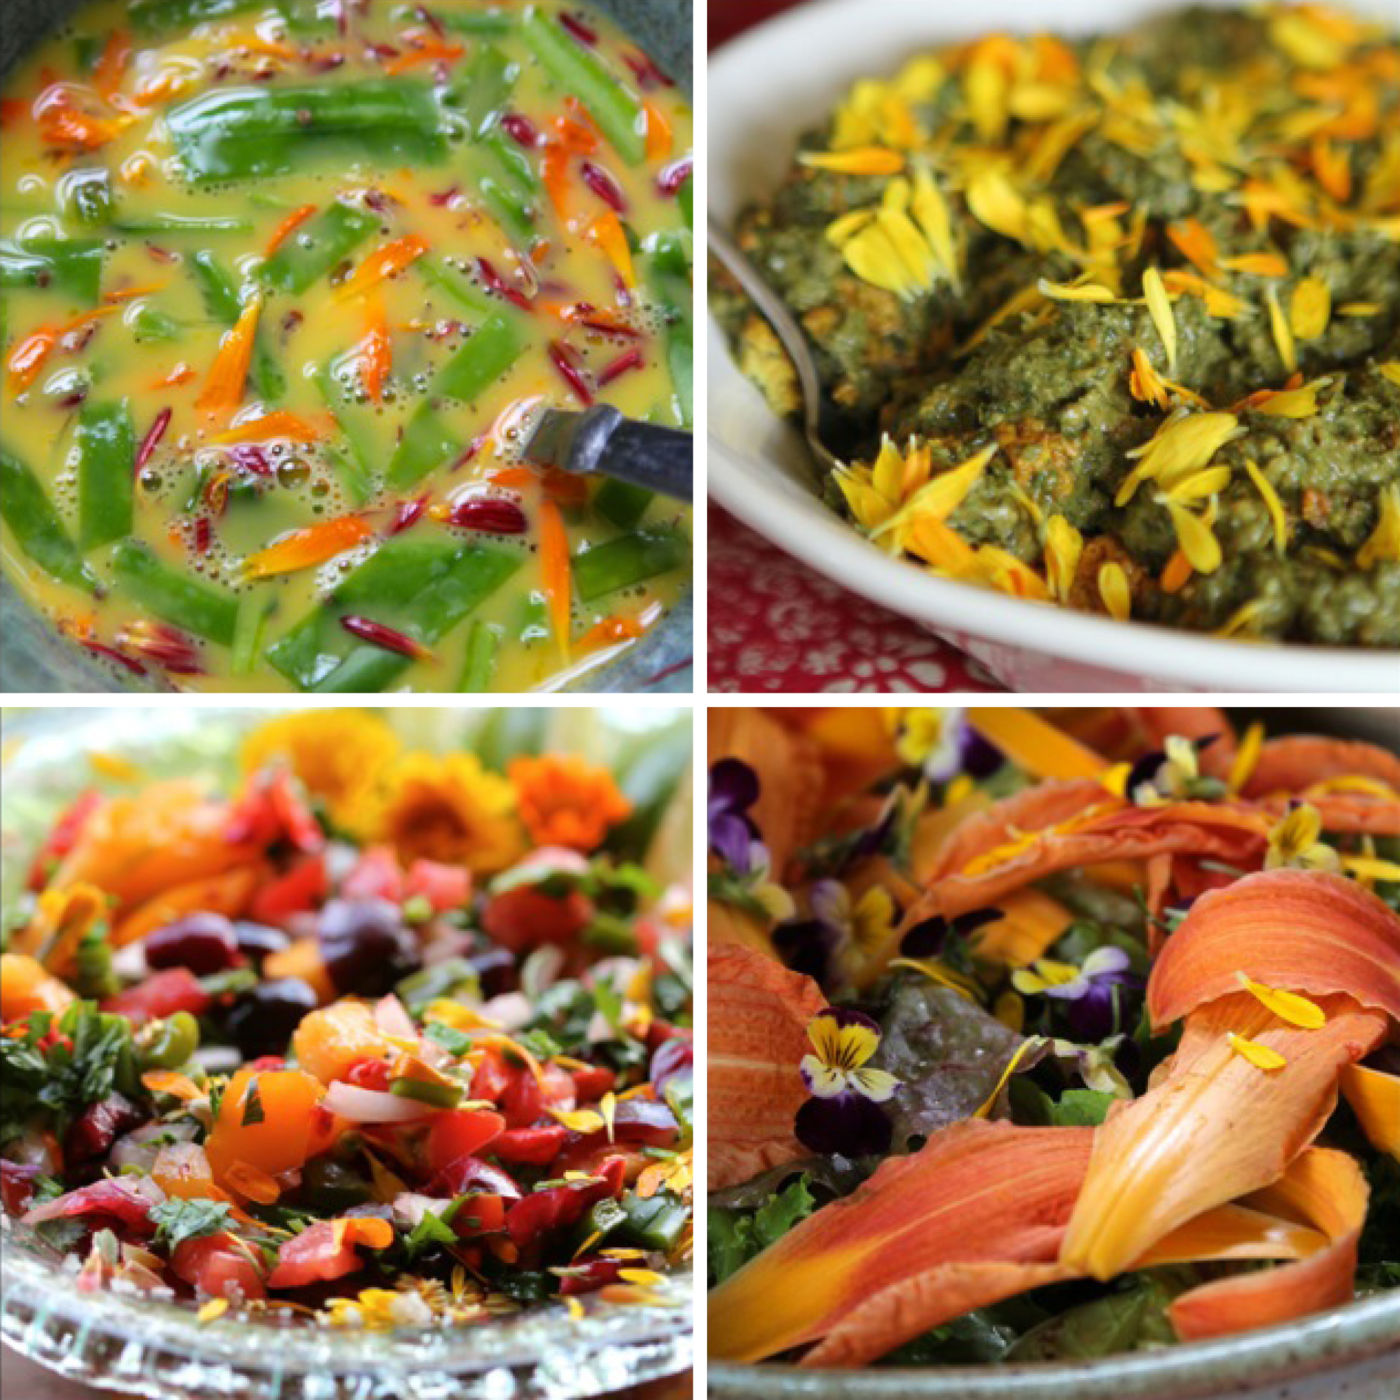 Dishes made with calendula flowers